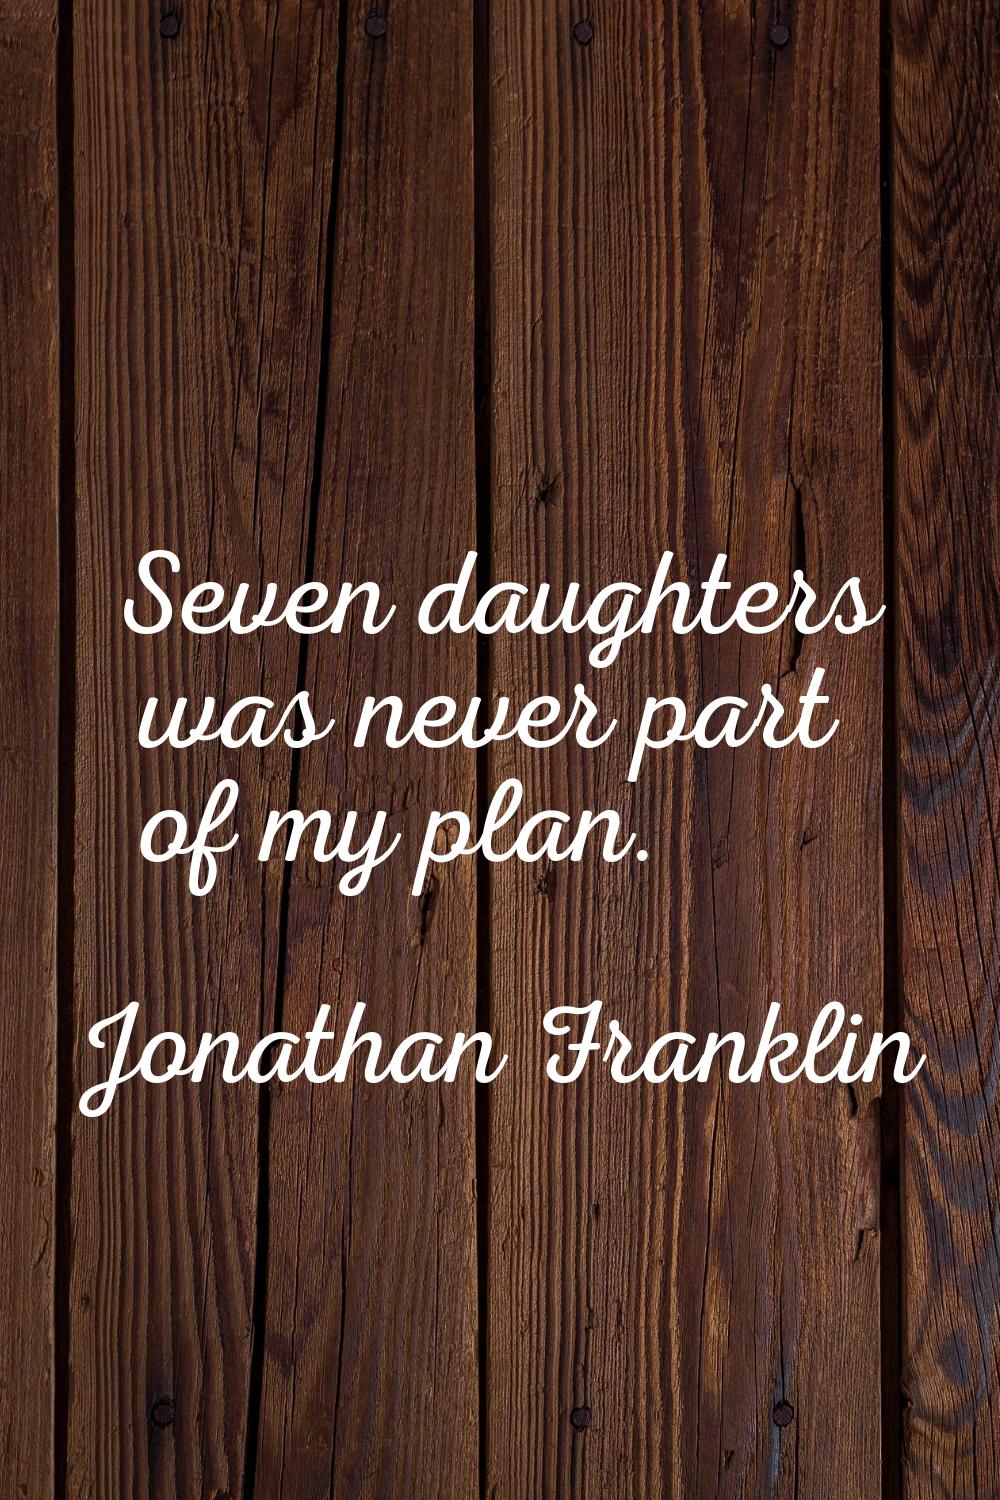 Seven daughters was never part of my plan.